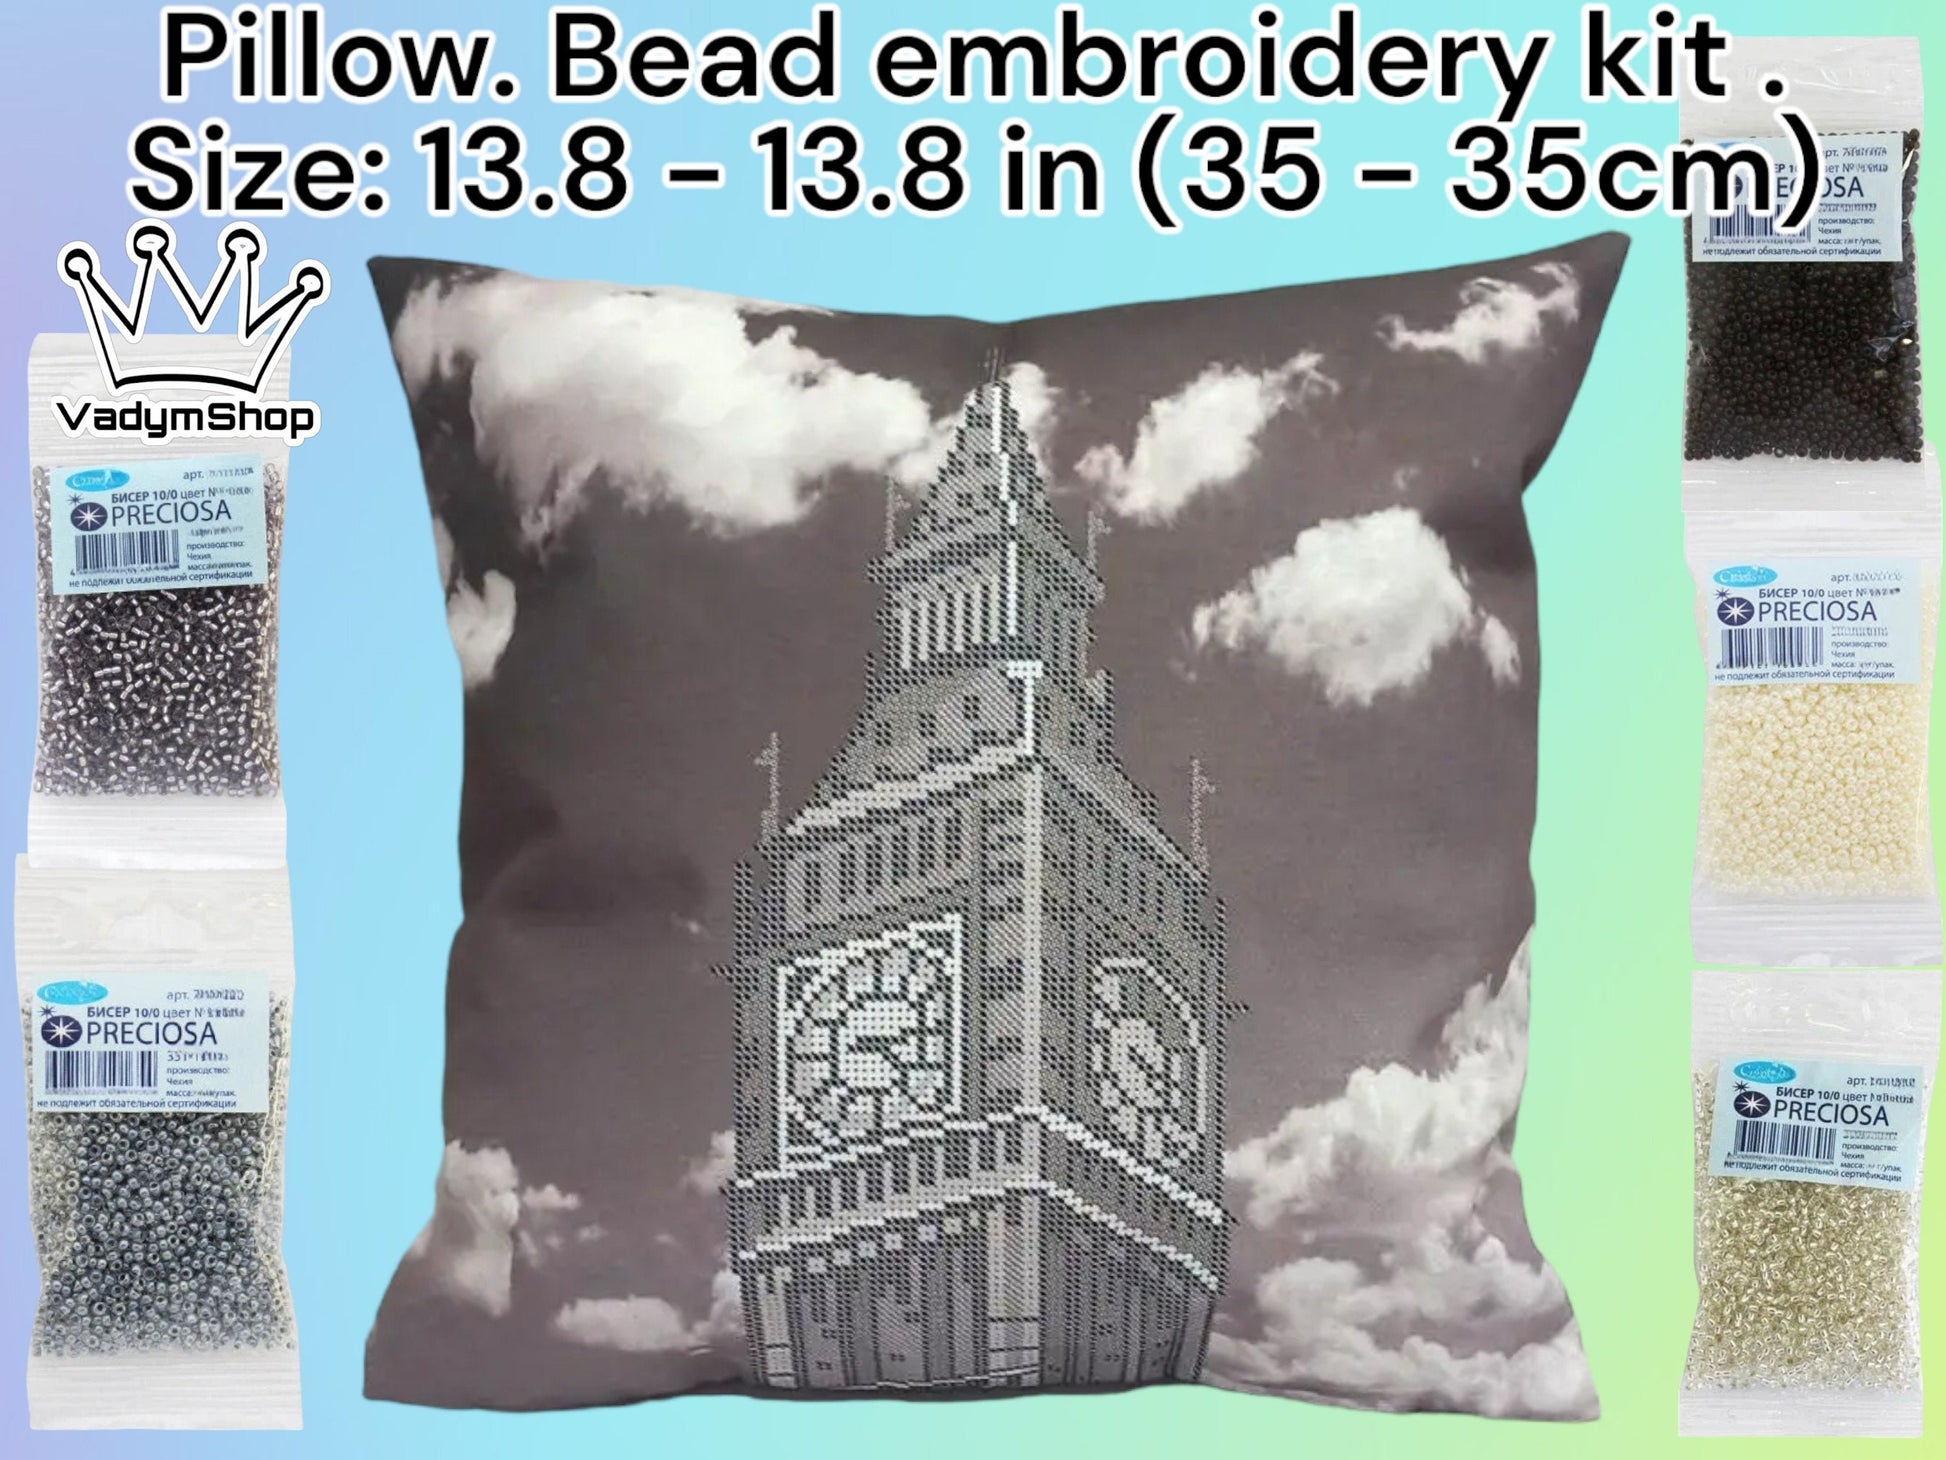 Handcrafted Pillow Bead Embroidery Kit: Easy and Fun Crafting Project - VadymShop